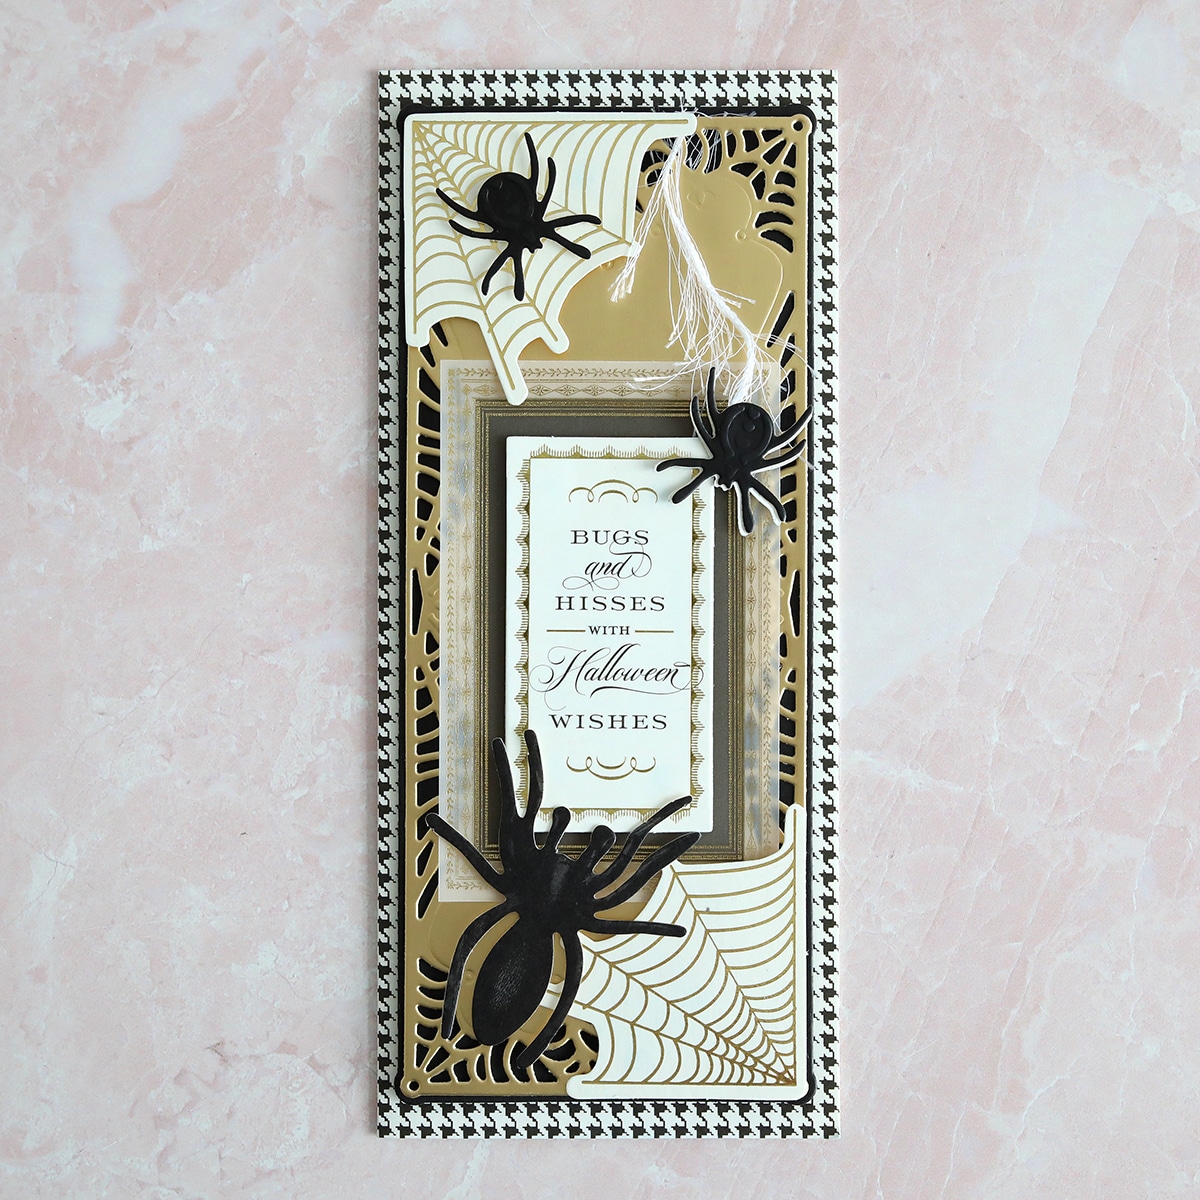 A black and gold card with a black spider on it.